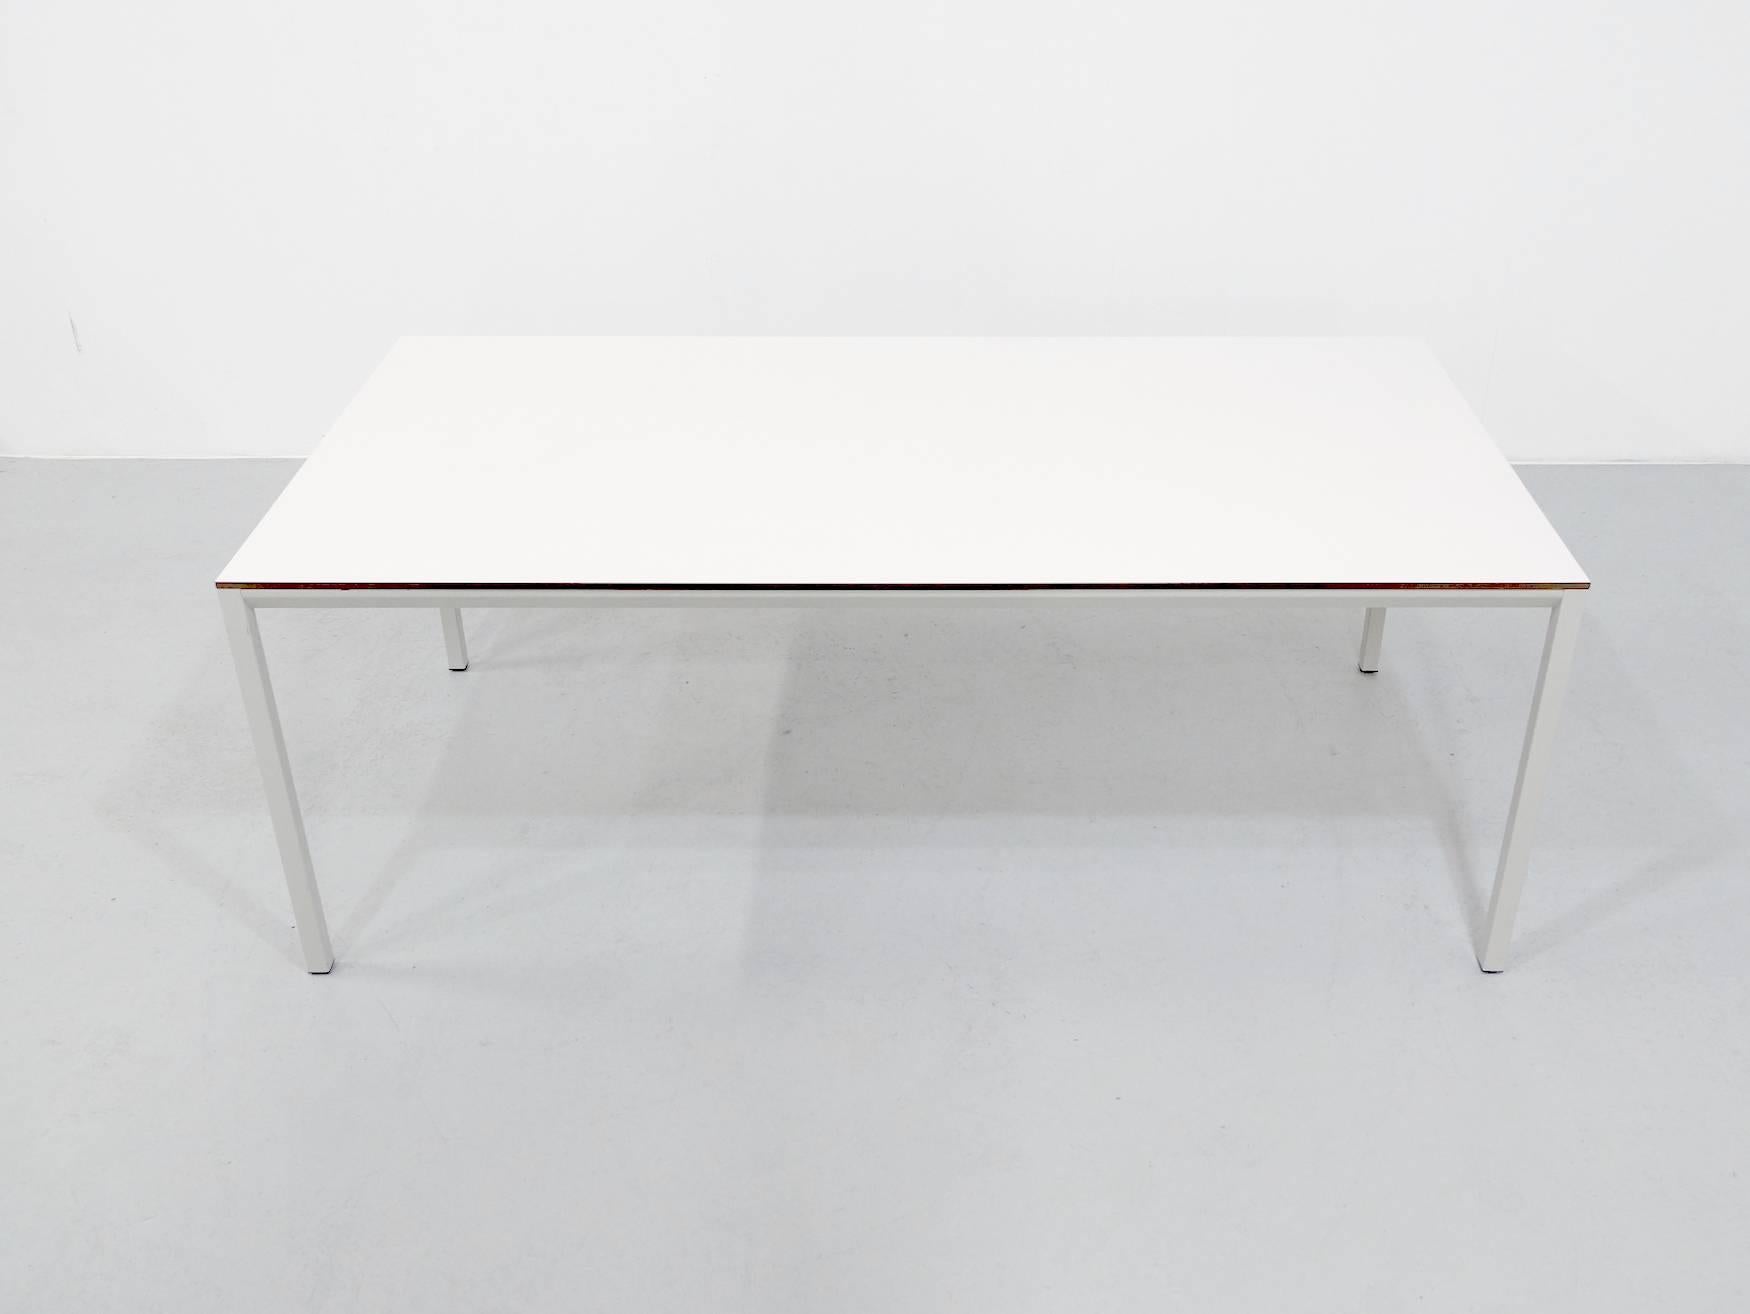 Friso Kramer designed the facet table in 1964 for Ahrend de Cirkel. The top is Ciranol with a very high resistance to scratching and user wear. The metal legs are detachable and easy to install. The Facet program that Friso Kramer designed for